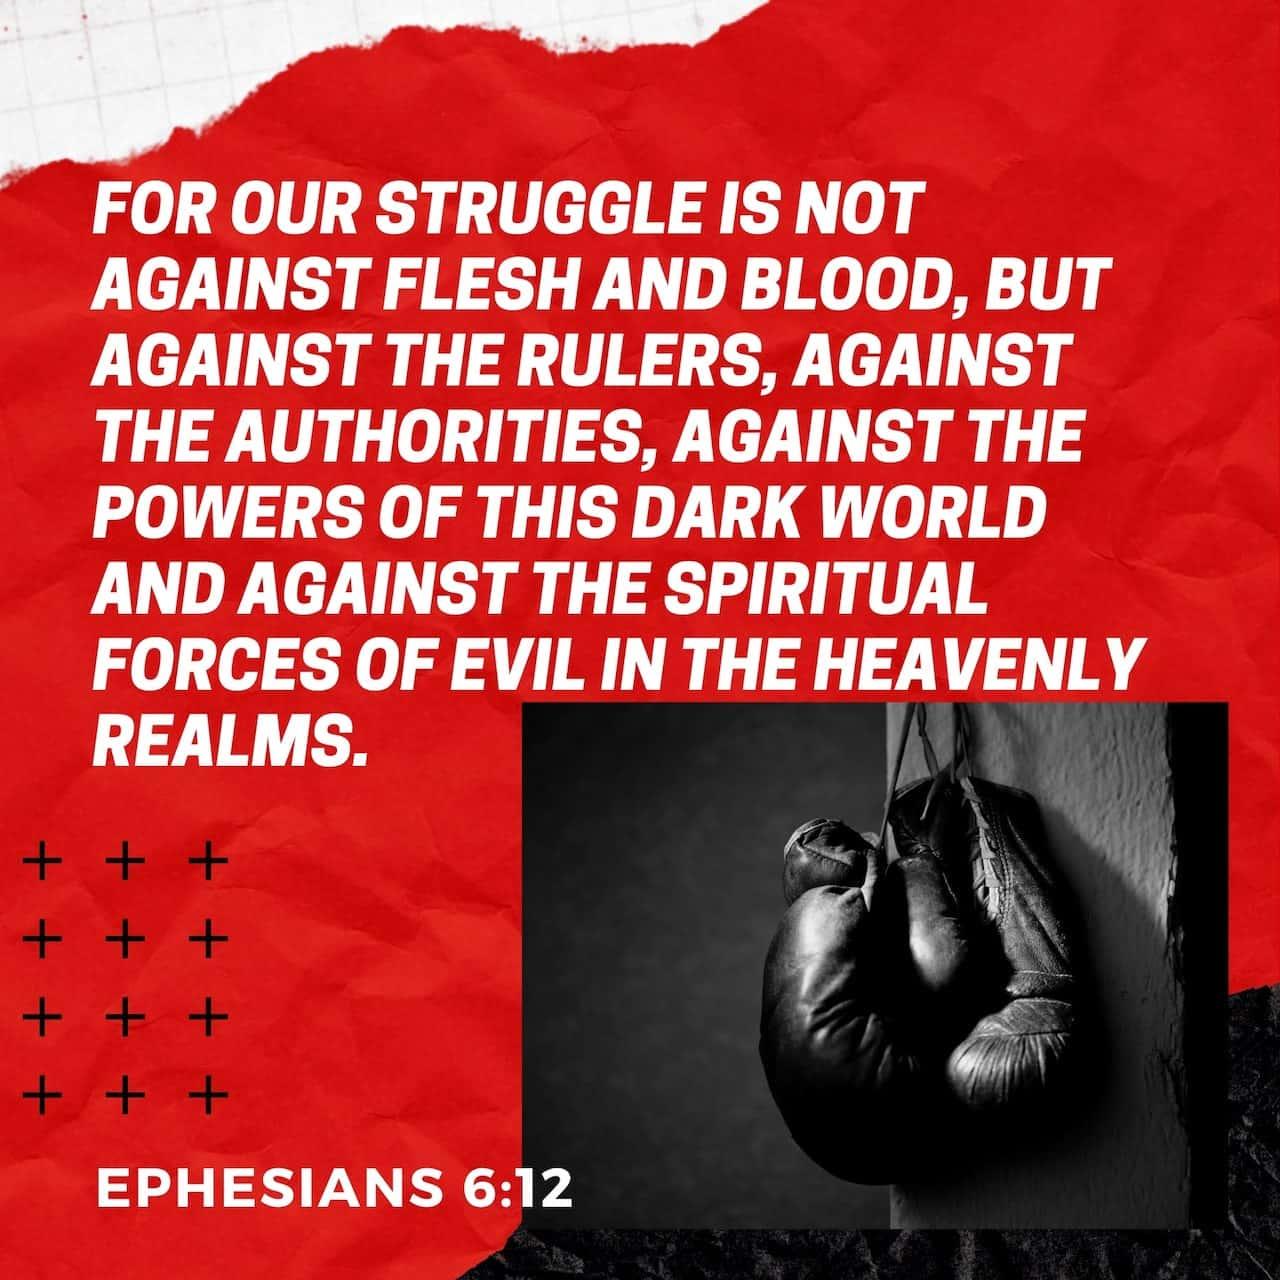 Bible Verse of the Day - day 160 - image 71281 (Ephesians 6:12)